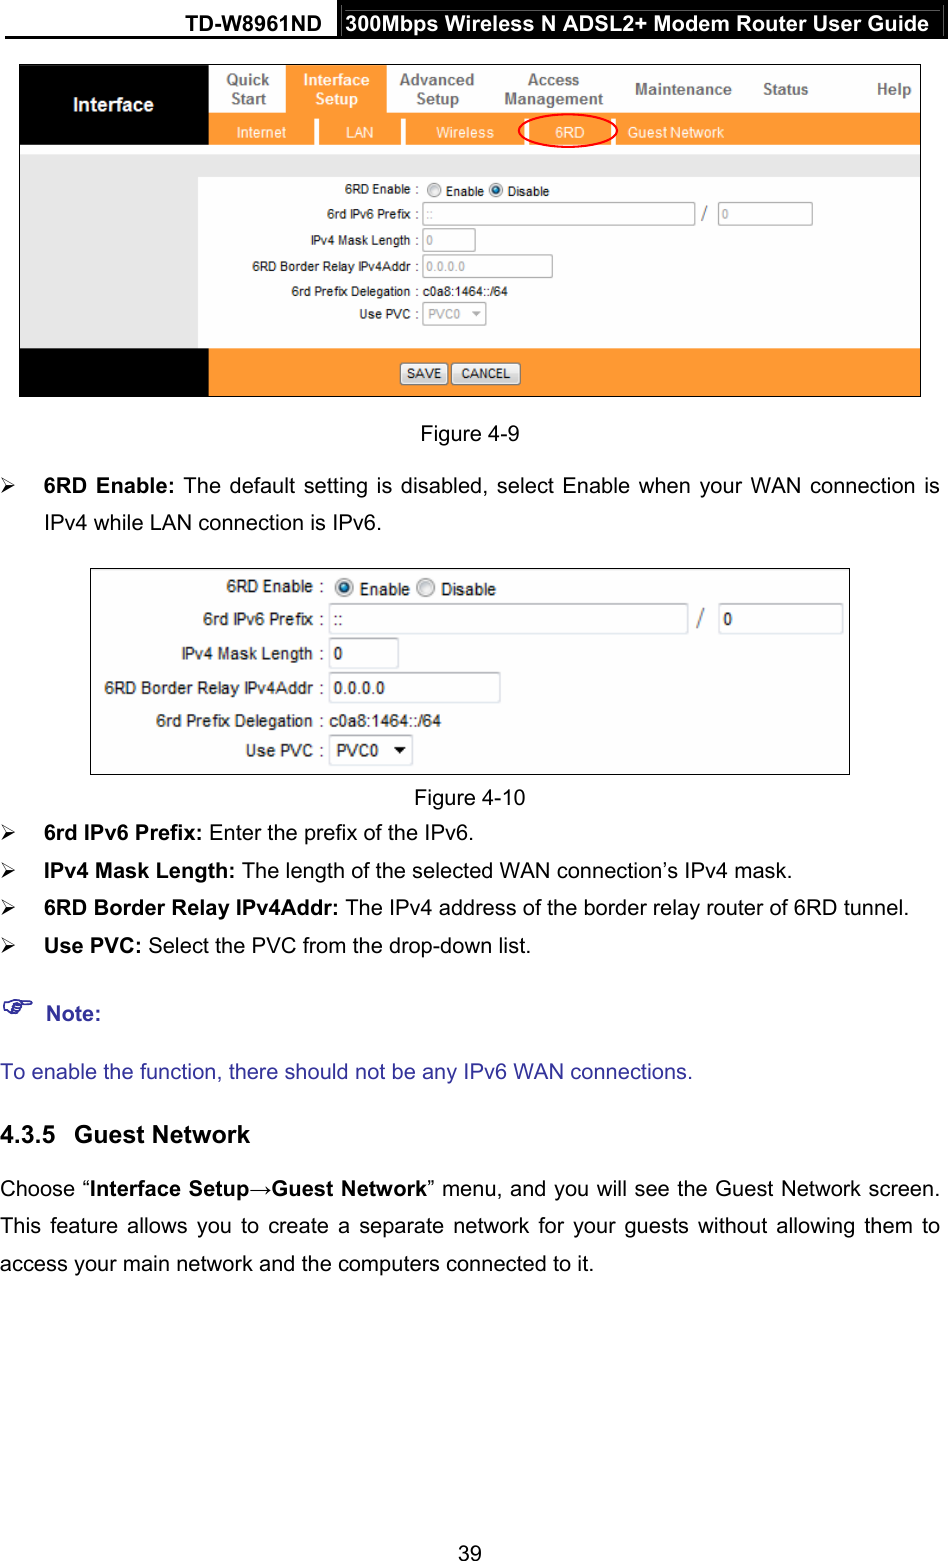 TD-W8961ND  300Mbps Wireless N ADSL2+ Modem Router User Guide  39 Figure 4-9  6RD Enable: The default setting is disabled, select Enable when your WAN connection is IPv4 while LAN connection is IPv6.    Figure 4-10  6rd IPv6 Prefix: Enter the prefix of the IPv6.  IPv4 Mask Length: The length of the selected WAN connection’s IPv4 mask.  6RD Border Relay IPv4Addr: The IPv4 address of the border relay router of 6RD tunnel.  Use PVC: Select the PVC from the drop-down list.  Note: To enable the function, there should not be any IPv6 WAN connections. 4.3.5  Guest Network Choose “Interface Setup→Guest Network” menu, and you will see the Guest Network screen. This feature allows you to create a separate network for your guests without allowing them to access your main network and the computers connected to it.  